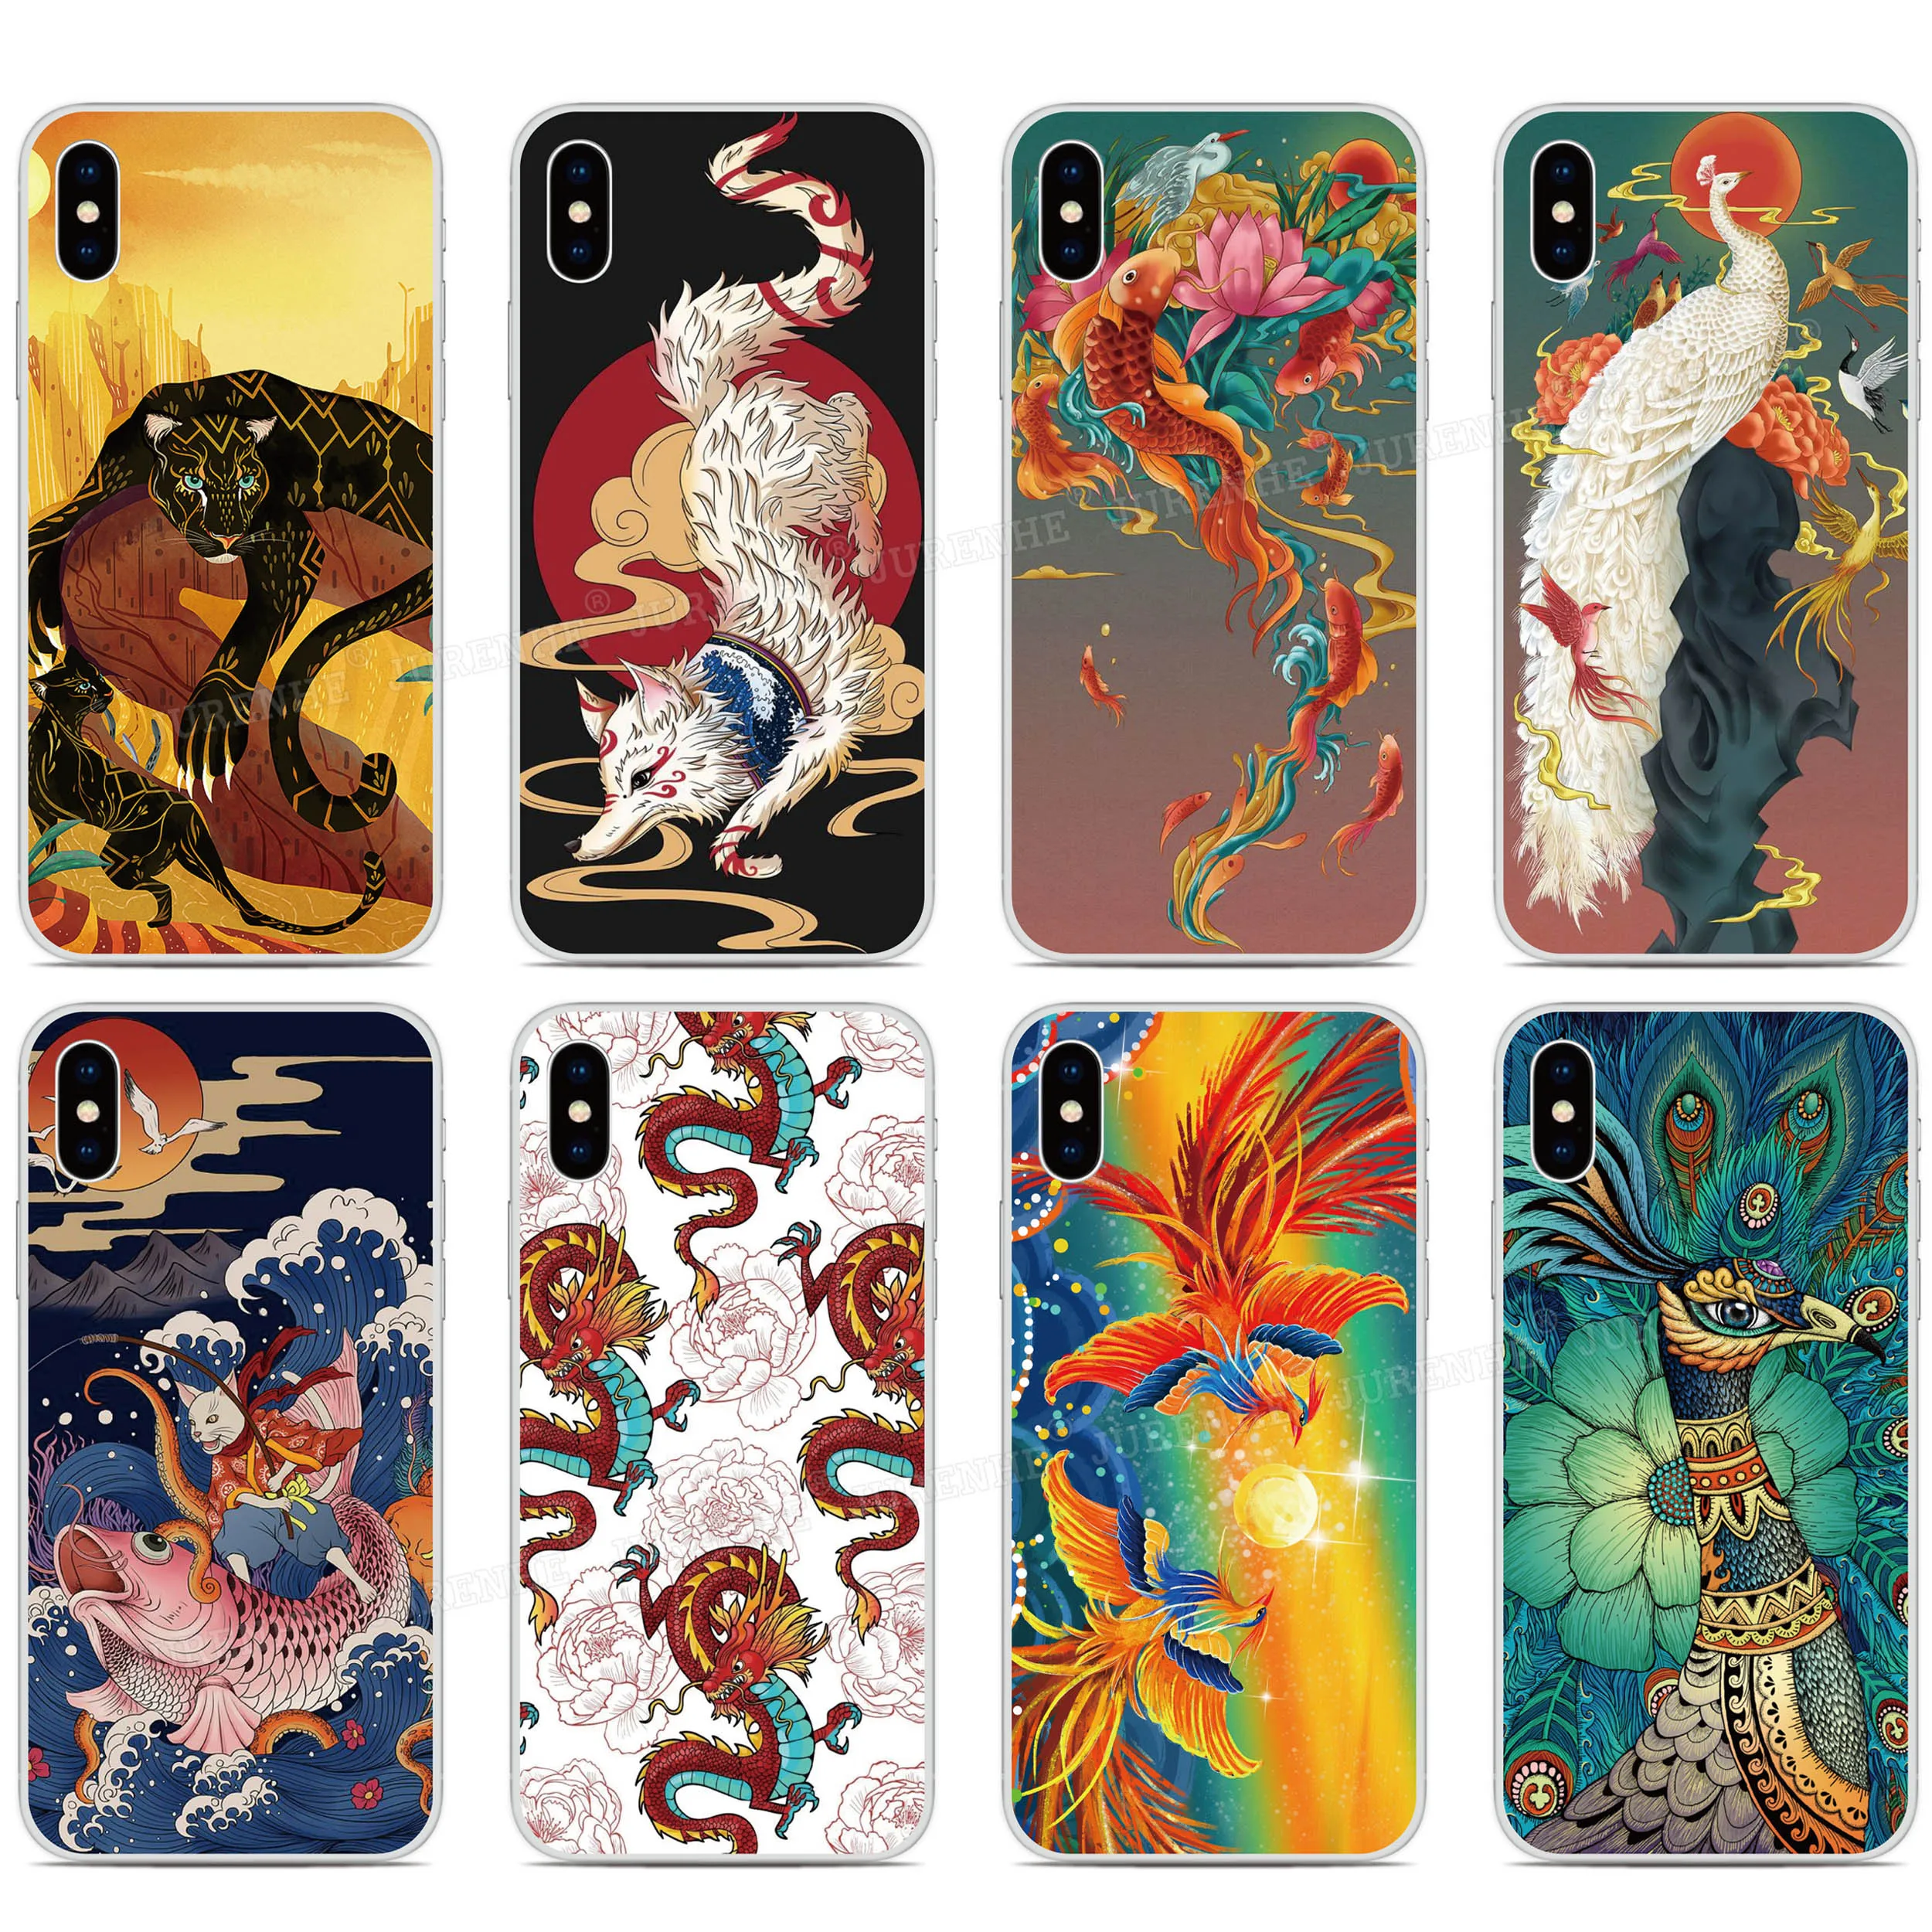 

Painting Animal Phone Case For UMIDIGI Bison GT A7S A3X A3S A3 A5 S3 A7 S5 A9 Pro F2 F1 Play Power 3 X One TPU Soft Cover